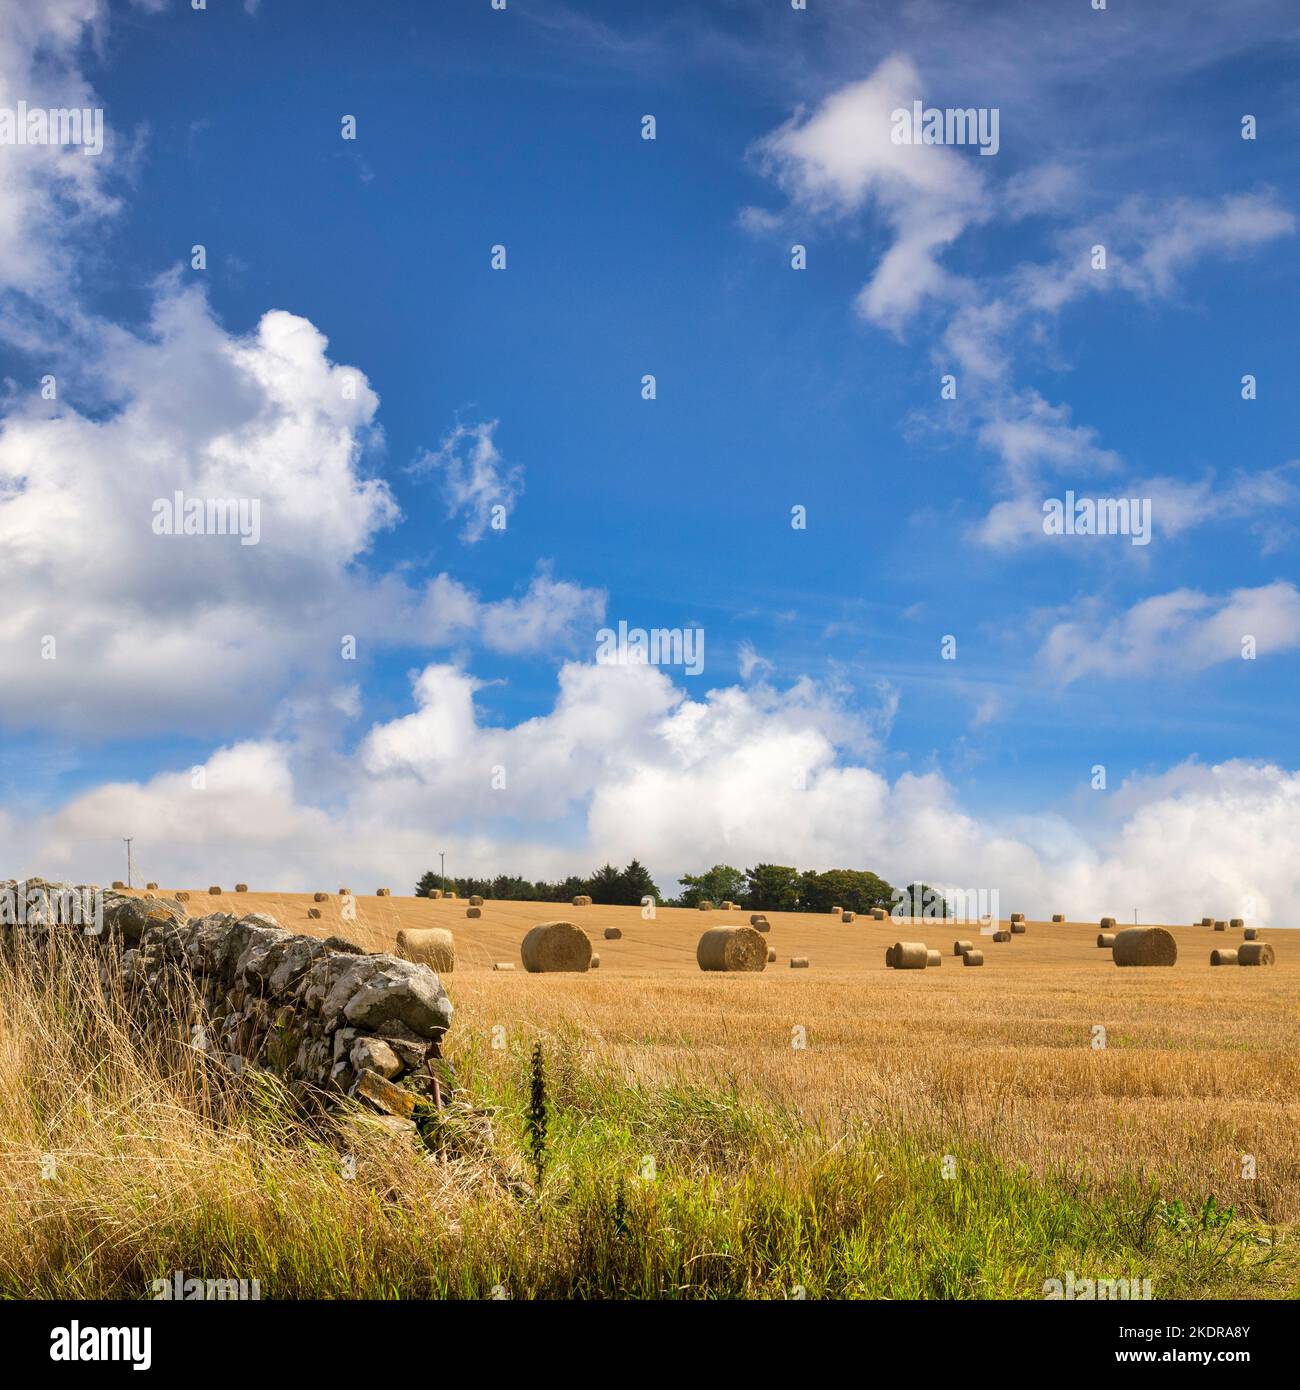 Haybales scattered in a field of corn stubble, and a dry stone wall, under a beautiful summer blue sky, near Portsoy, Aberdeenshire, Scotland. Focus i Stock Photo